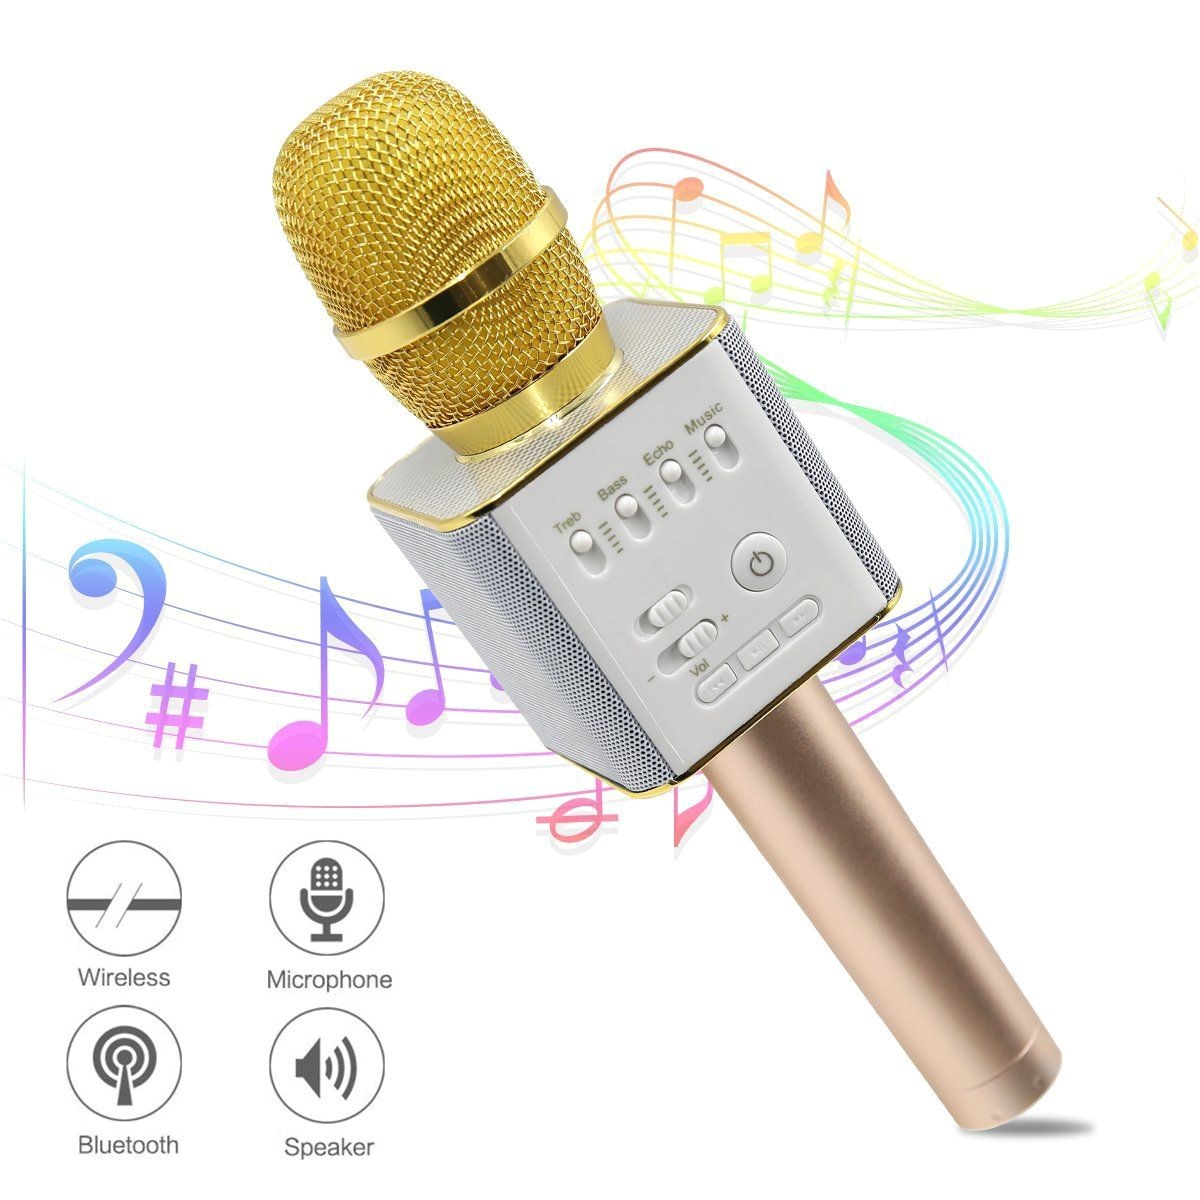 ula wireless karaoke microphones bluetooth karaoke machine upgraded 2600mah stereo player outdoor family ktv party handheld singing q9 compatible with